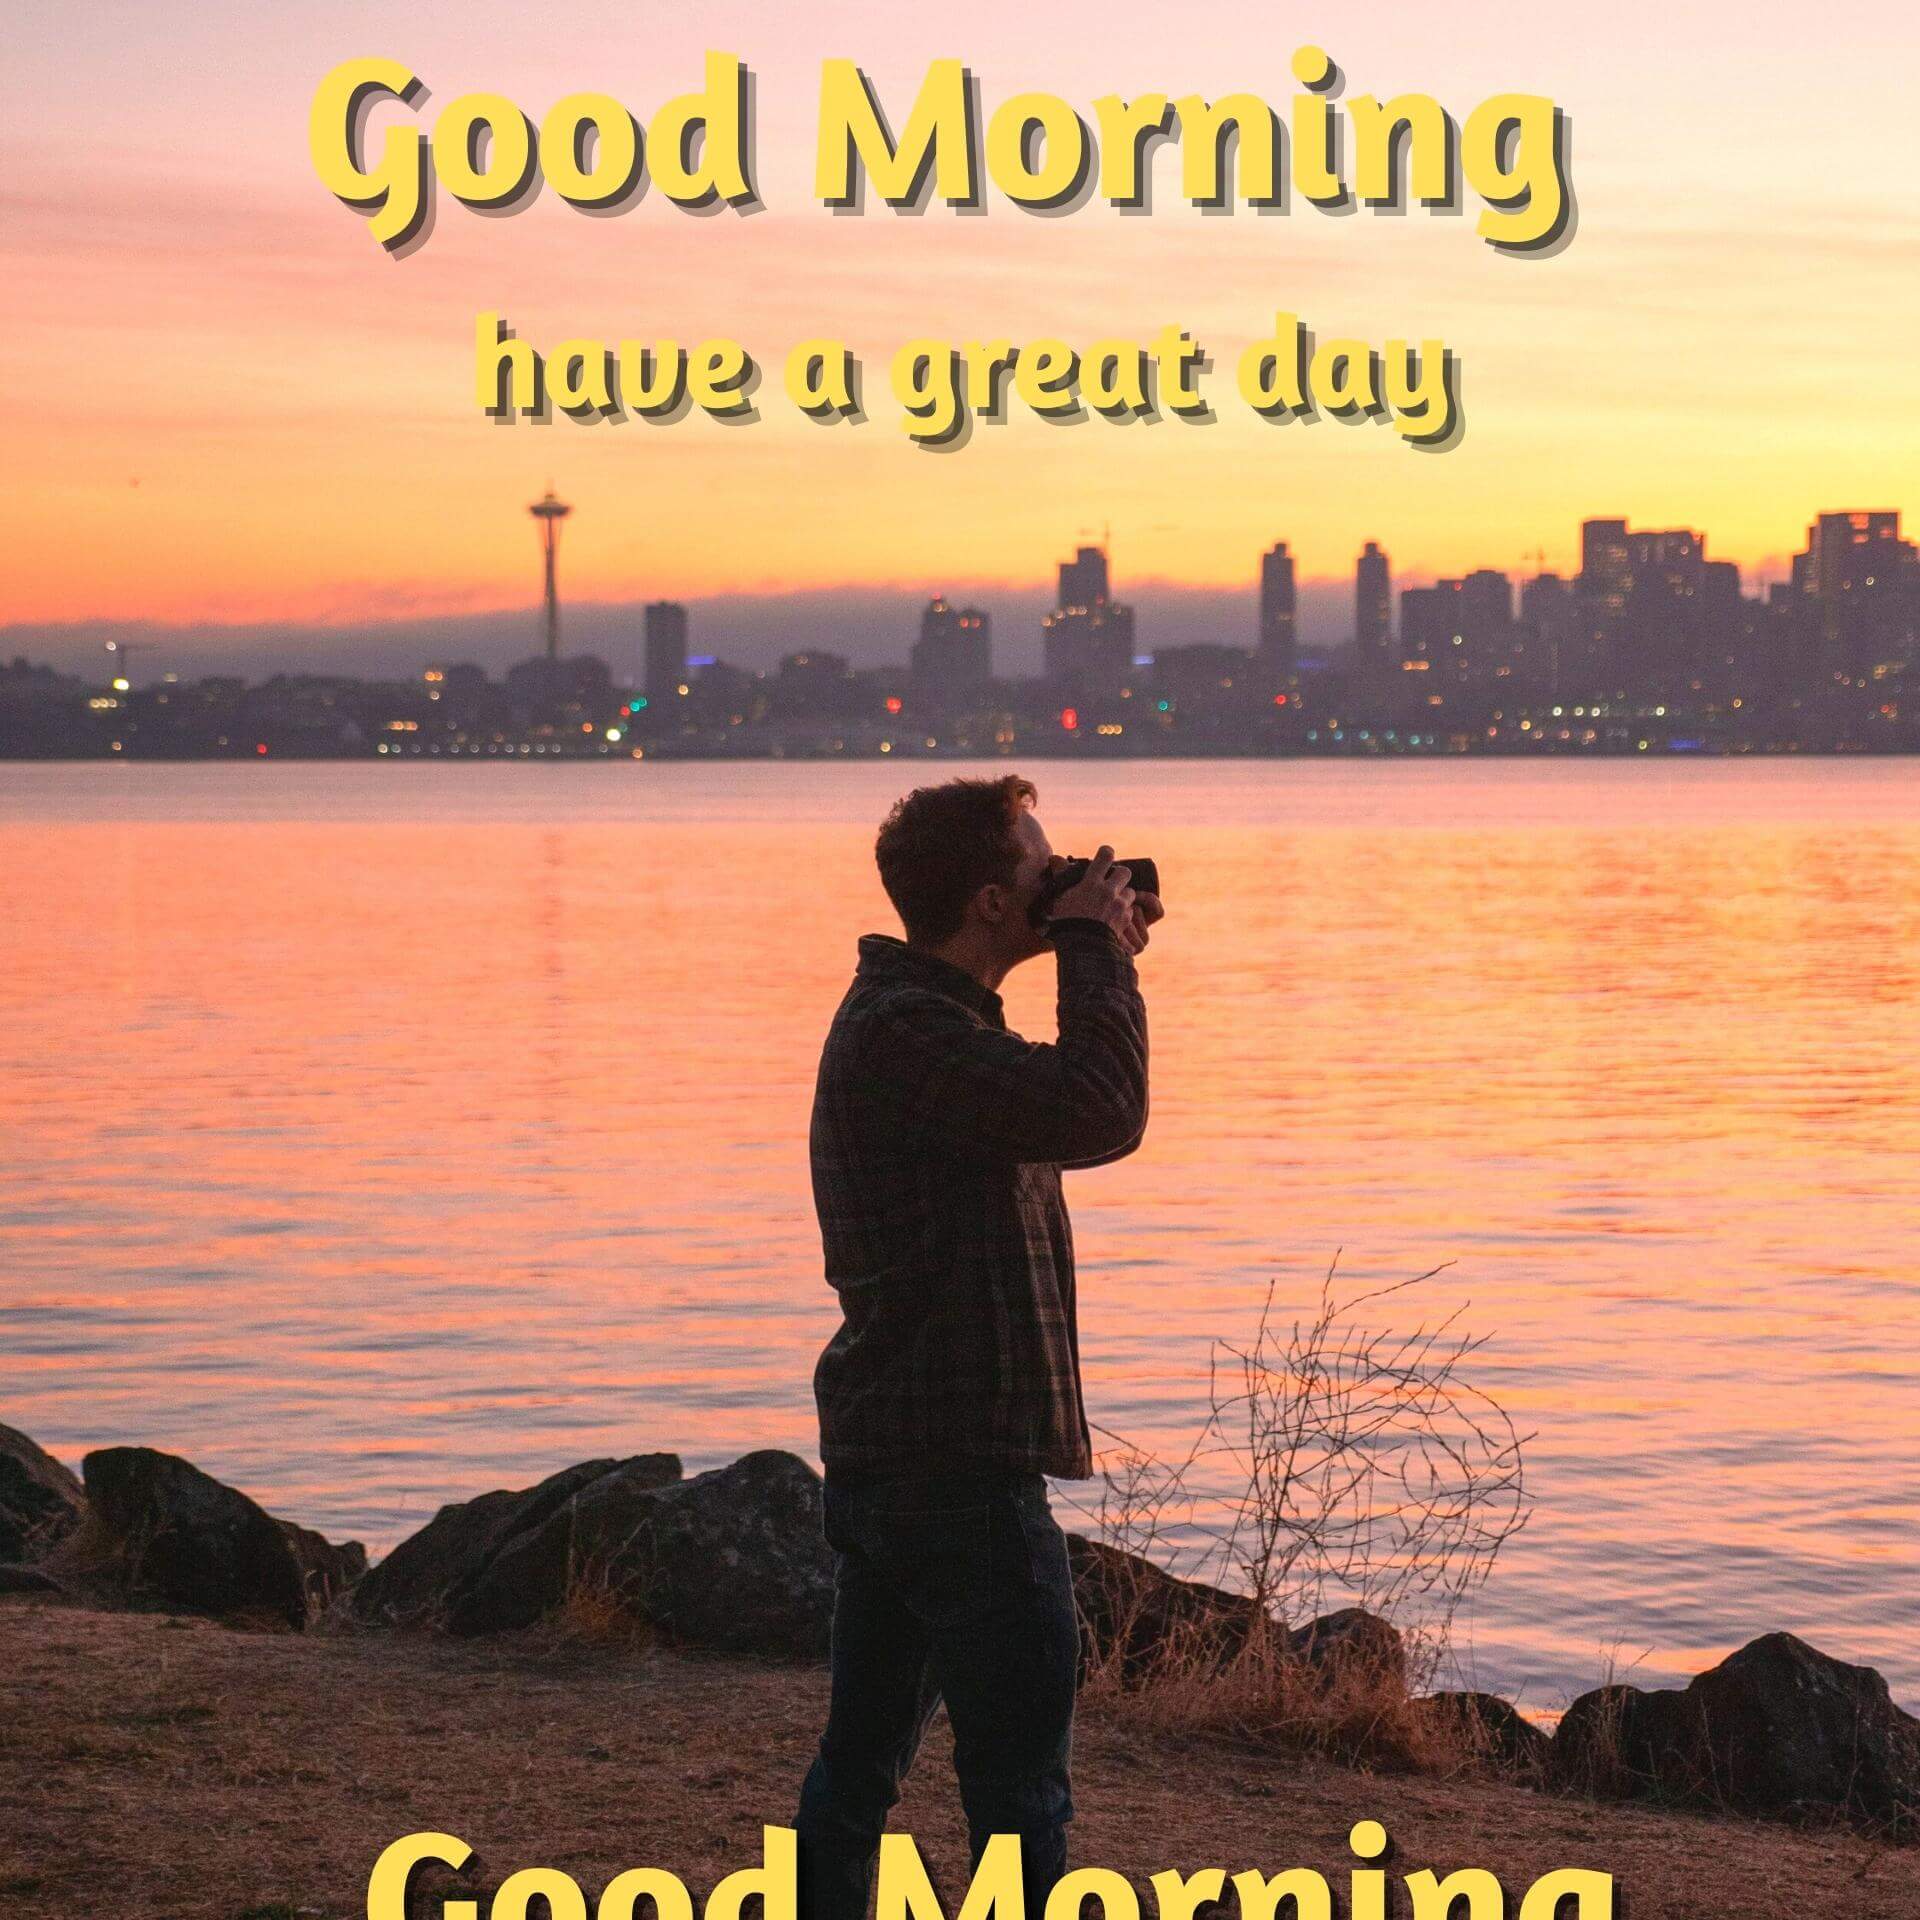 images of good morning wishes free download